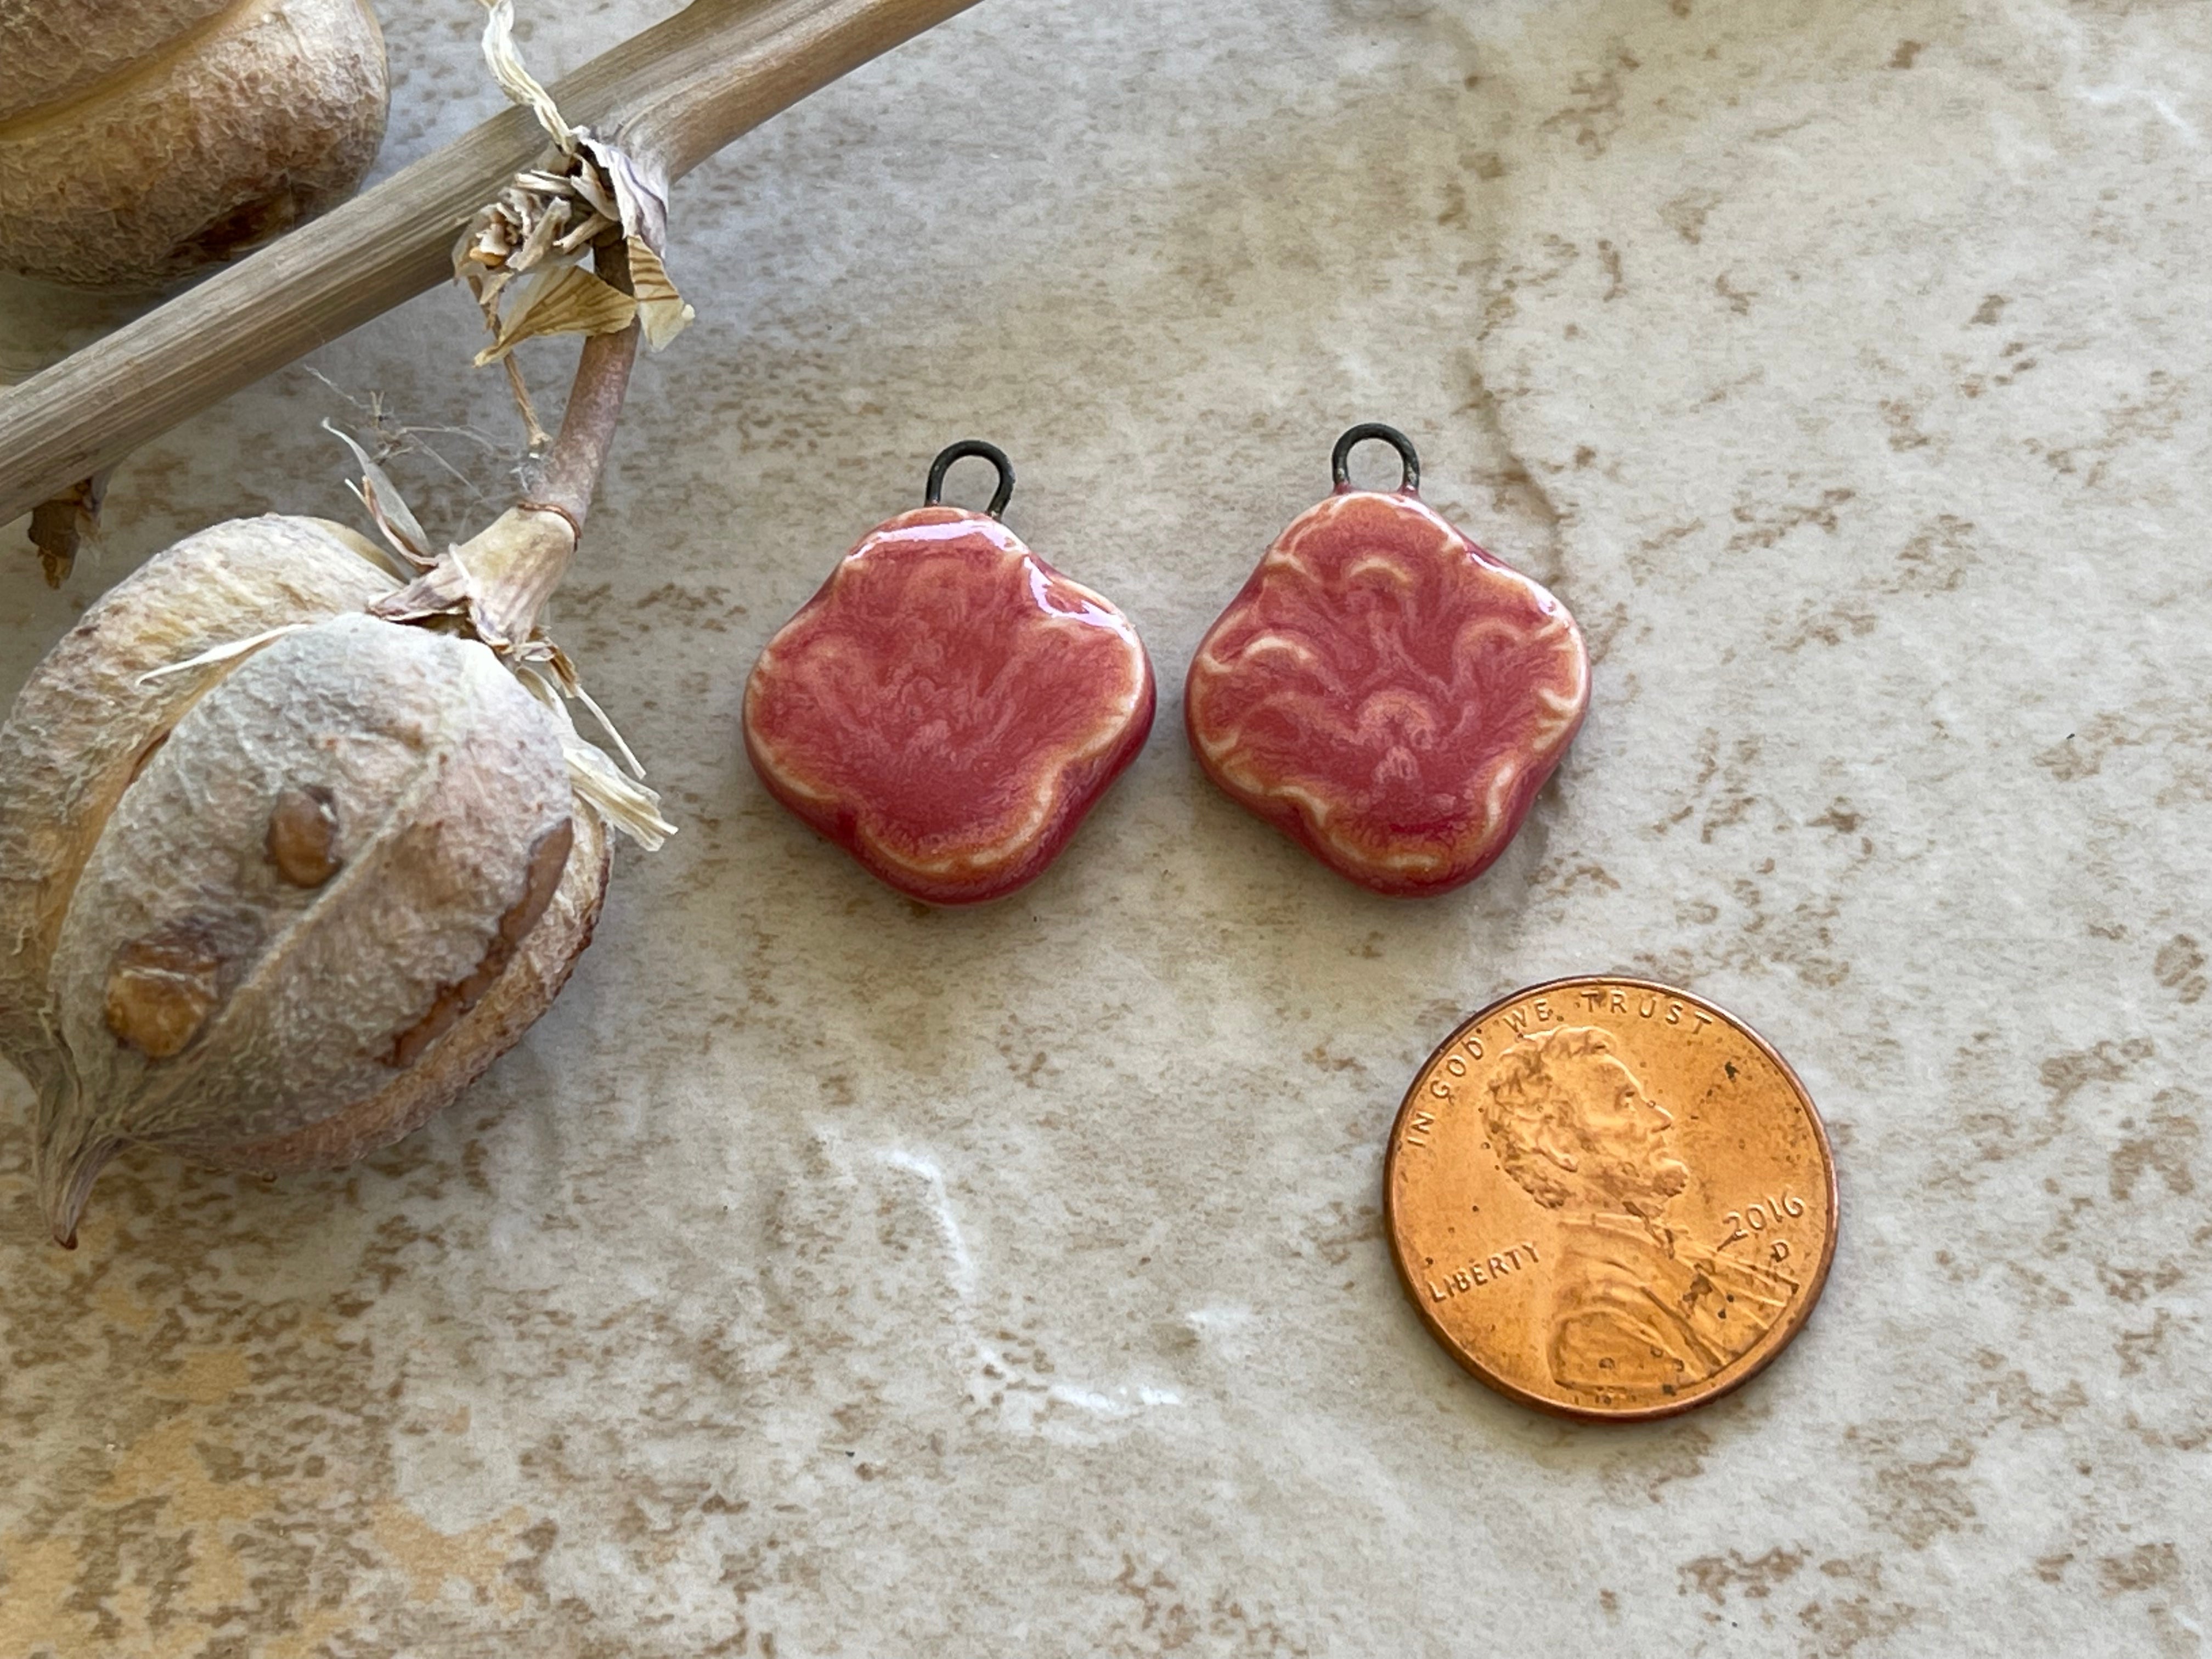 Red/Pink Quatrefoil Earring Bead Pair, Porcelain Ceramic Charms, Jewelry Making Components, Beading Handmade, DIY Earrings, DIY Beads